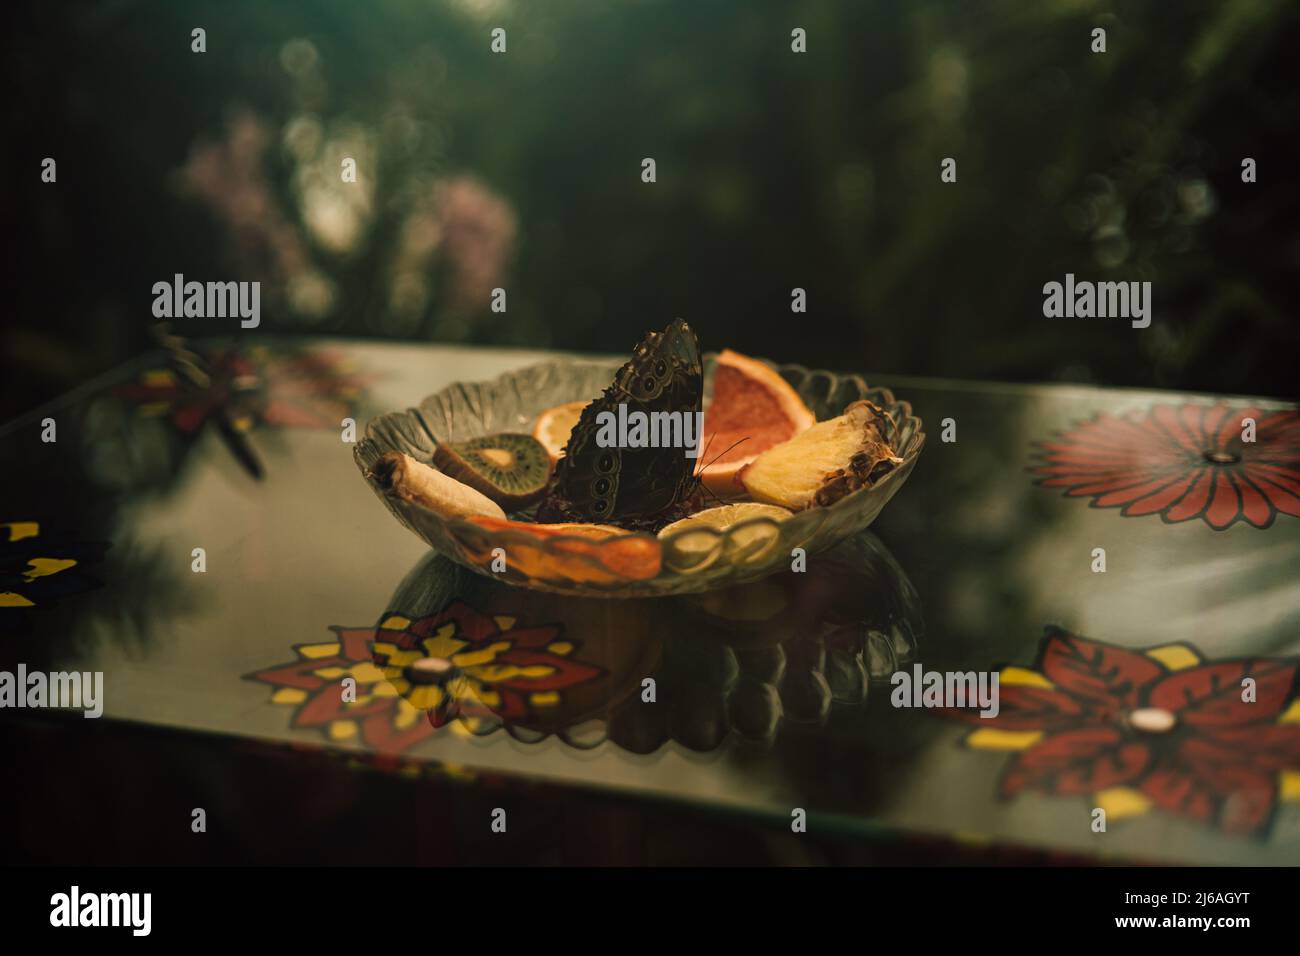 Butterfly sat on a platter with fruit to eat Stock Photo